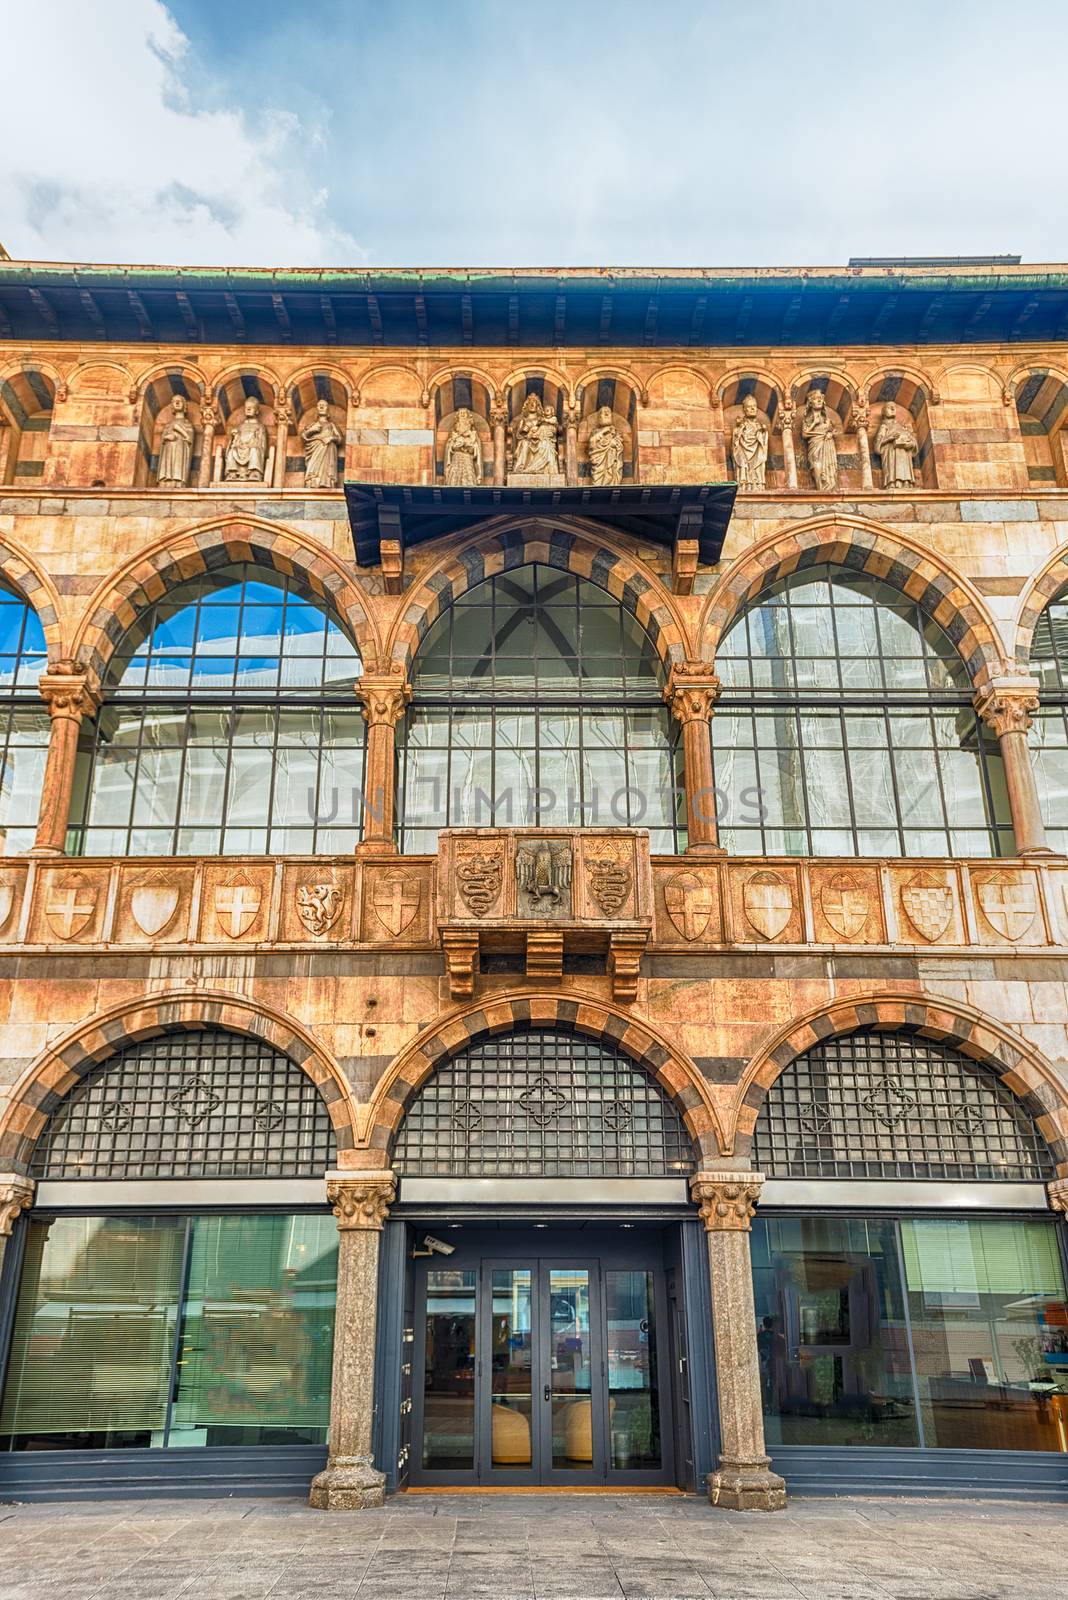 Facade of the Loggia degli Osii, historical building in Piazza Mercanti, central city square of Milan, Italy